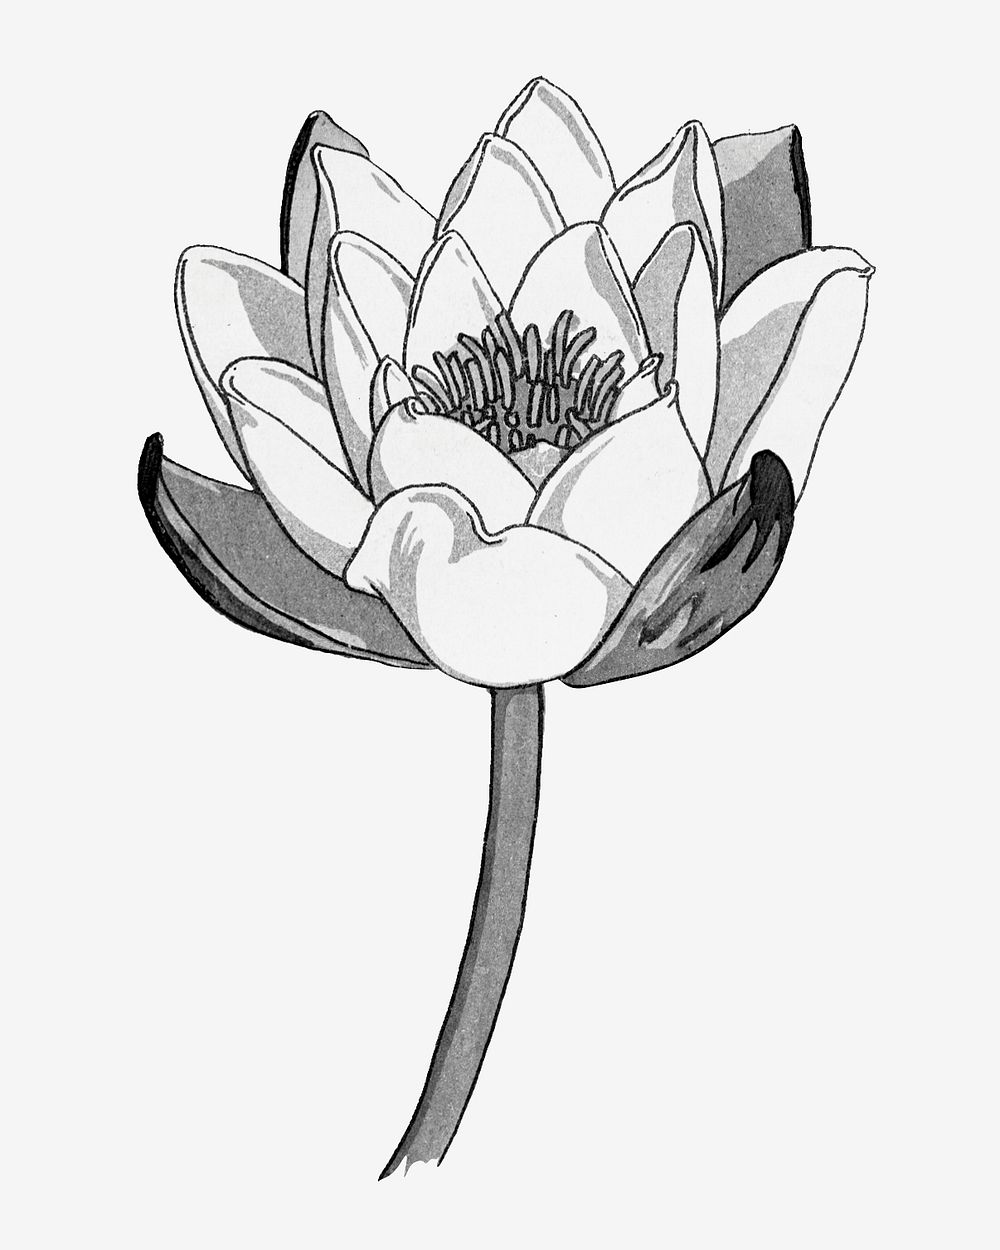 Black and white line drawing water lily flower design element